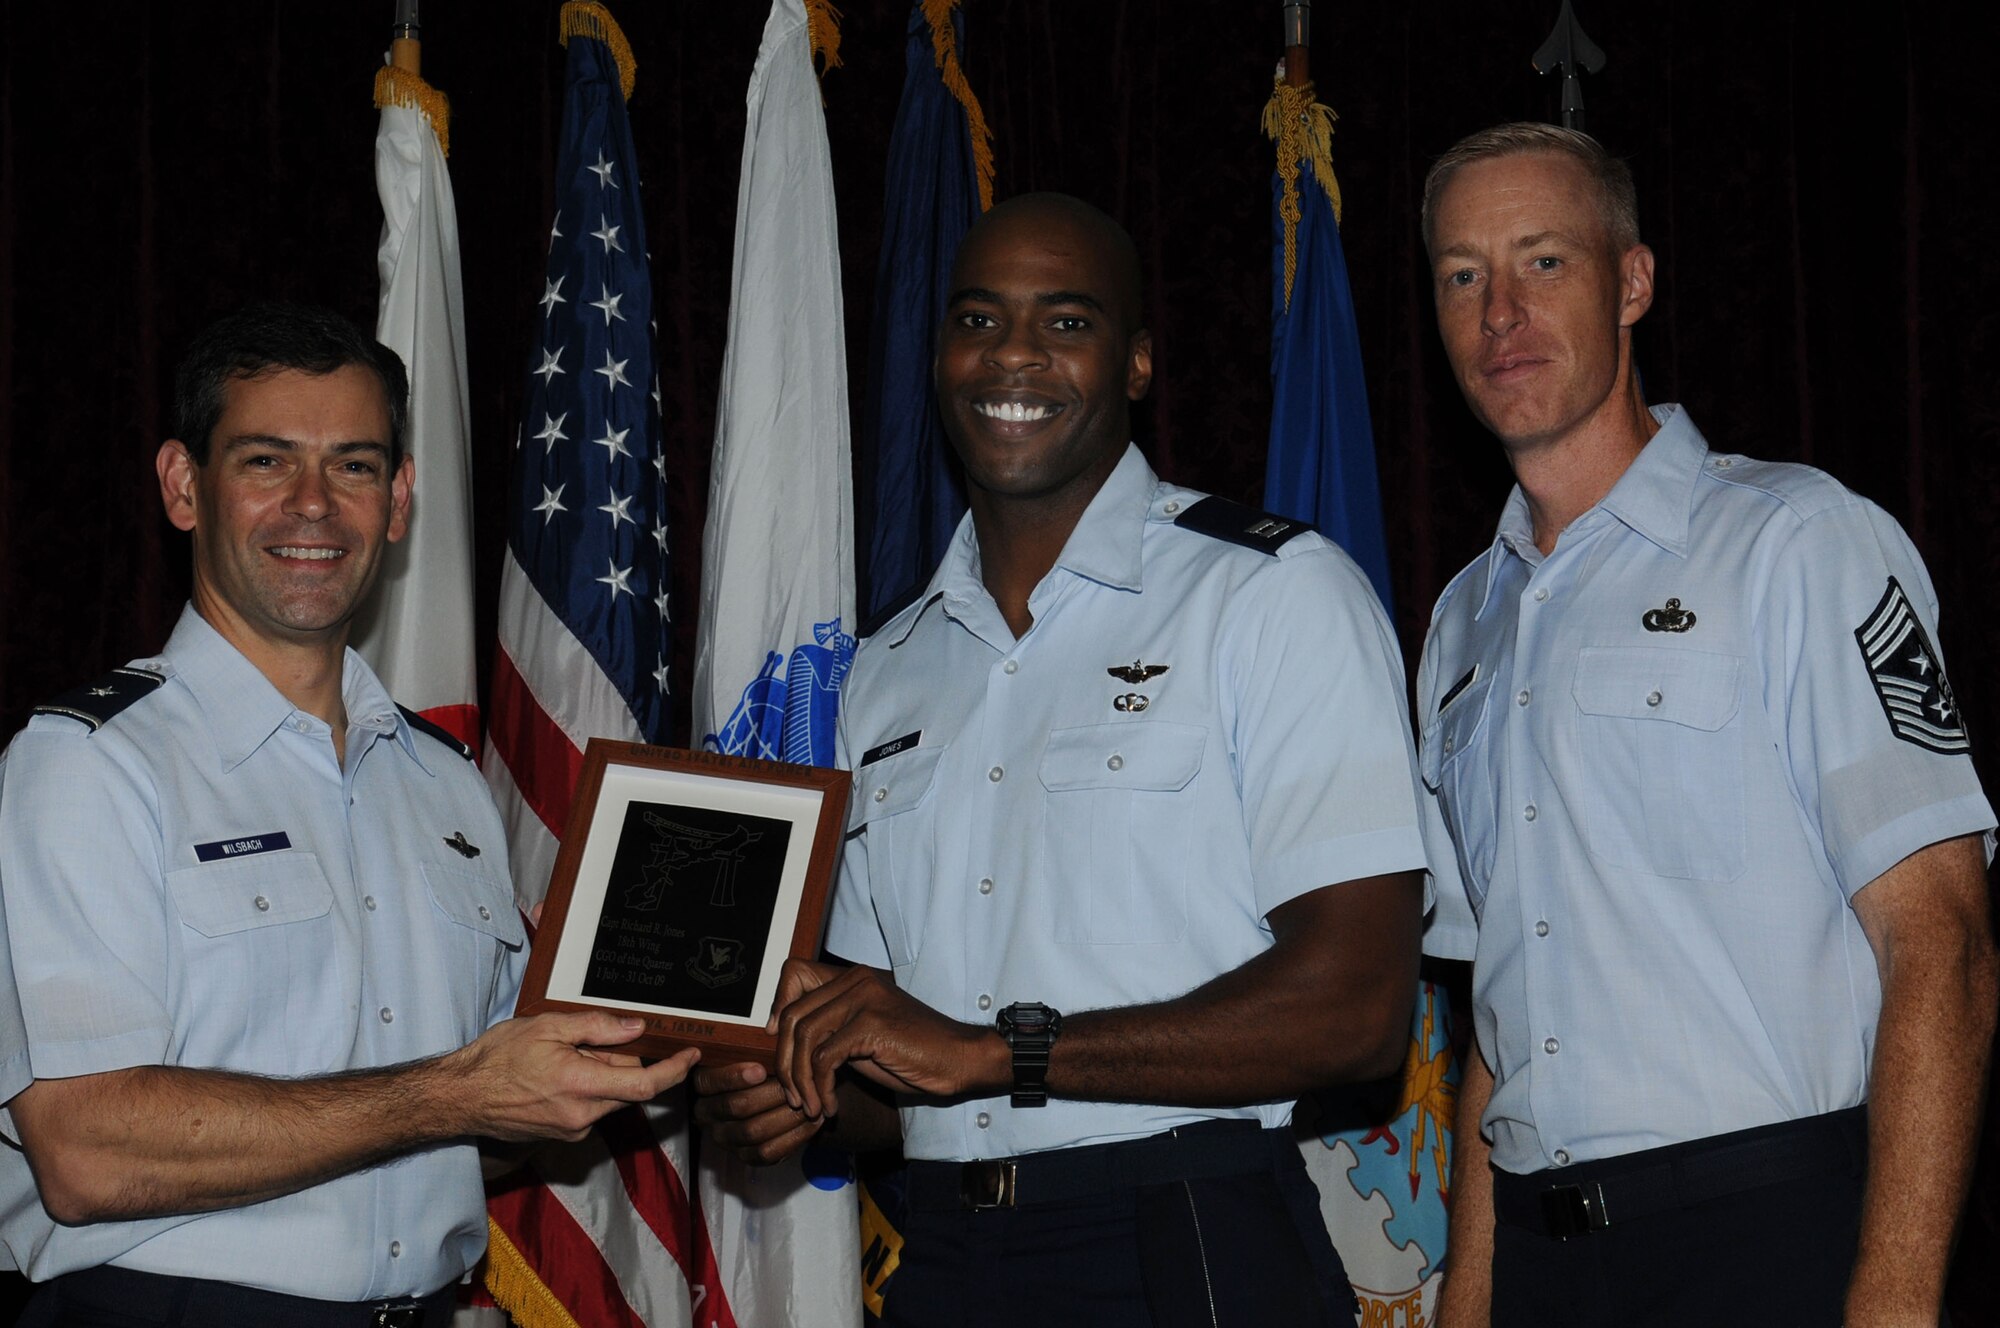 Capt. Richard Jones, 44th Fighter Squadron, was named the 18th Wing Company Grade Officer of the Quarter.